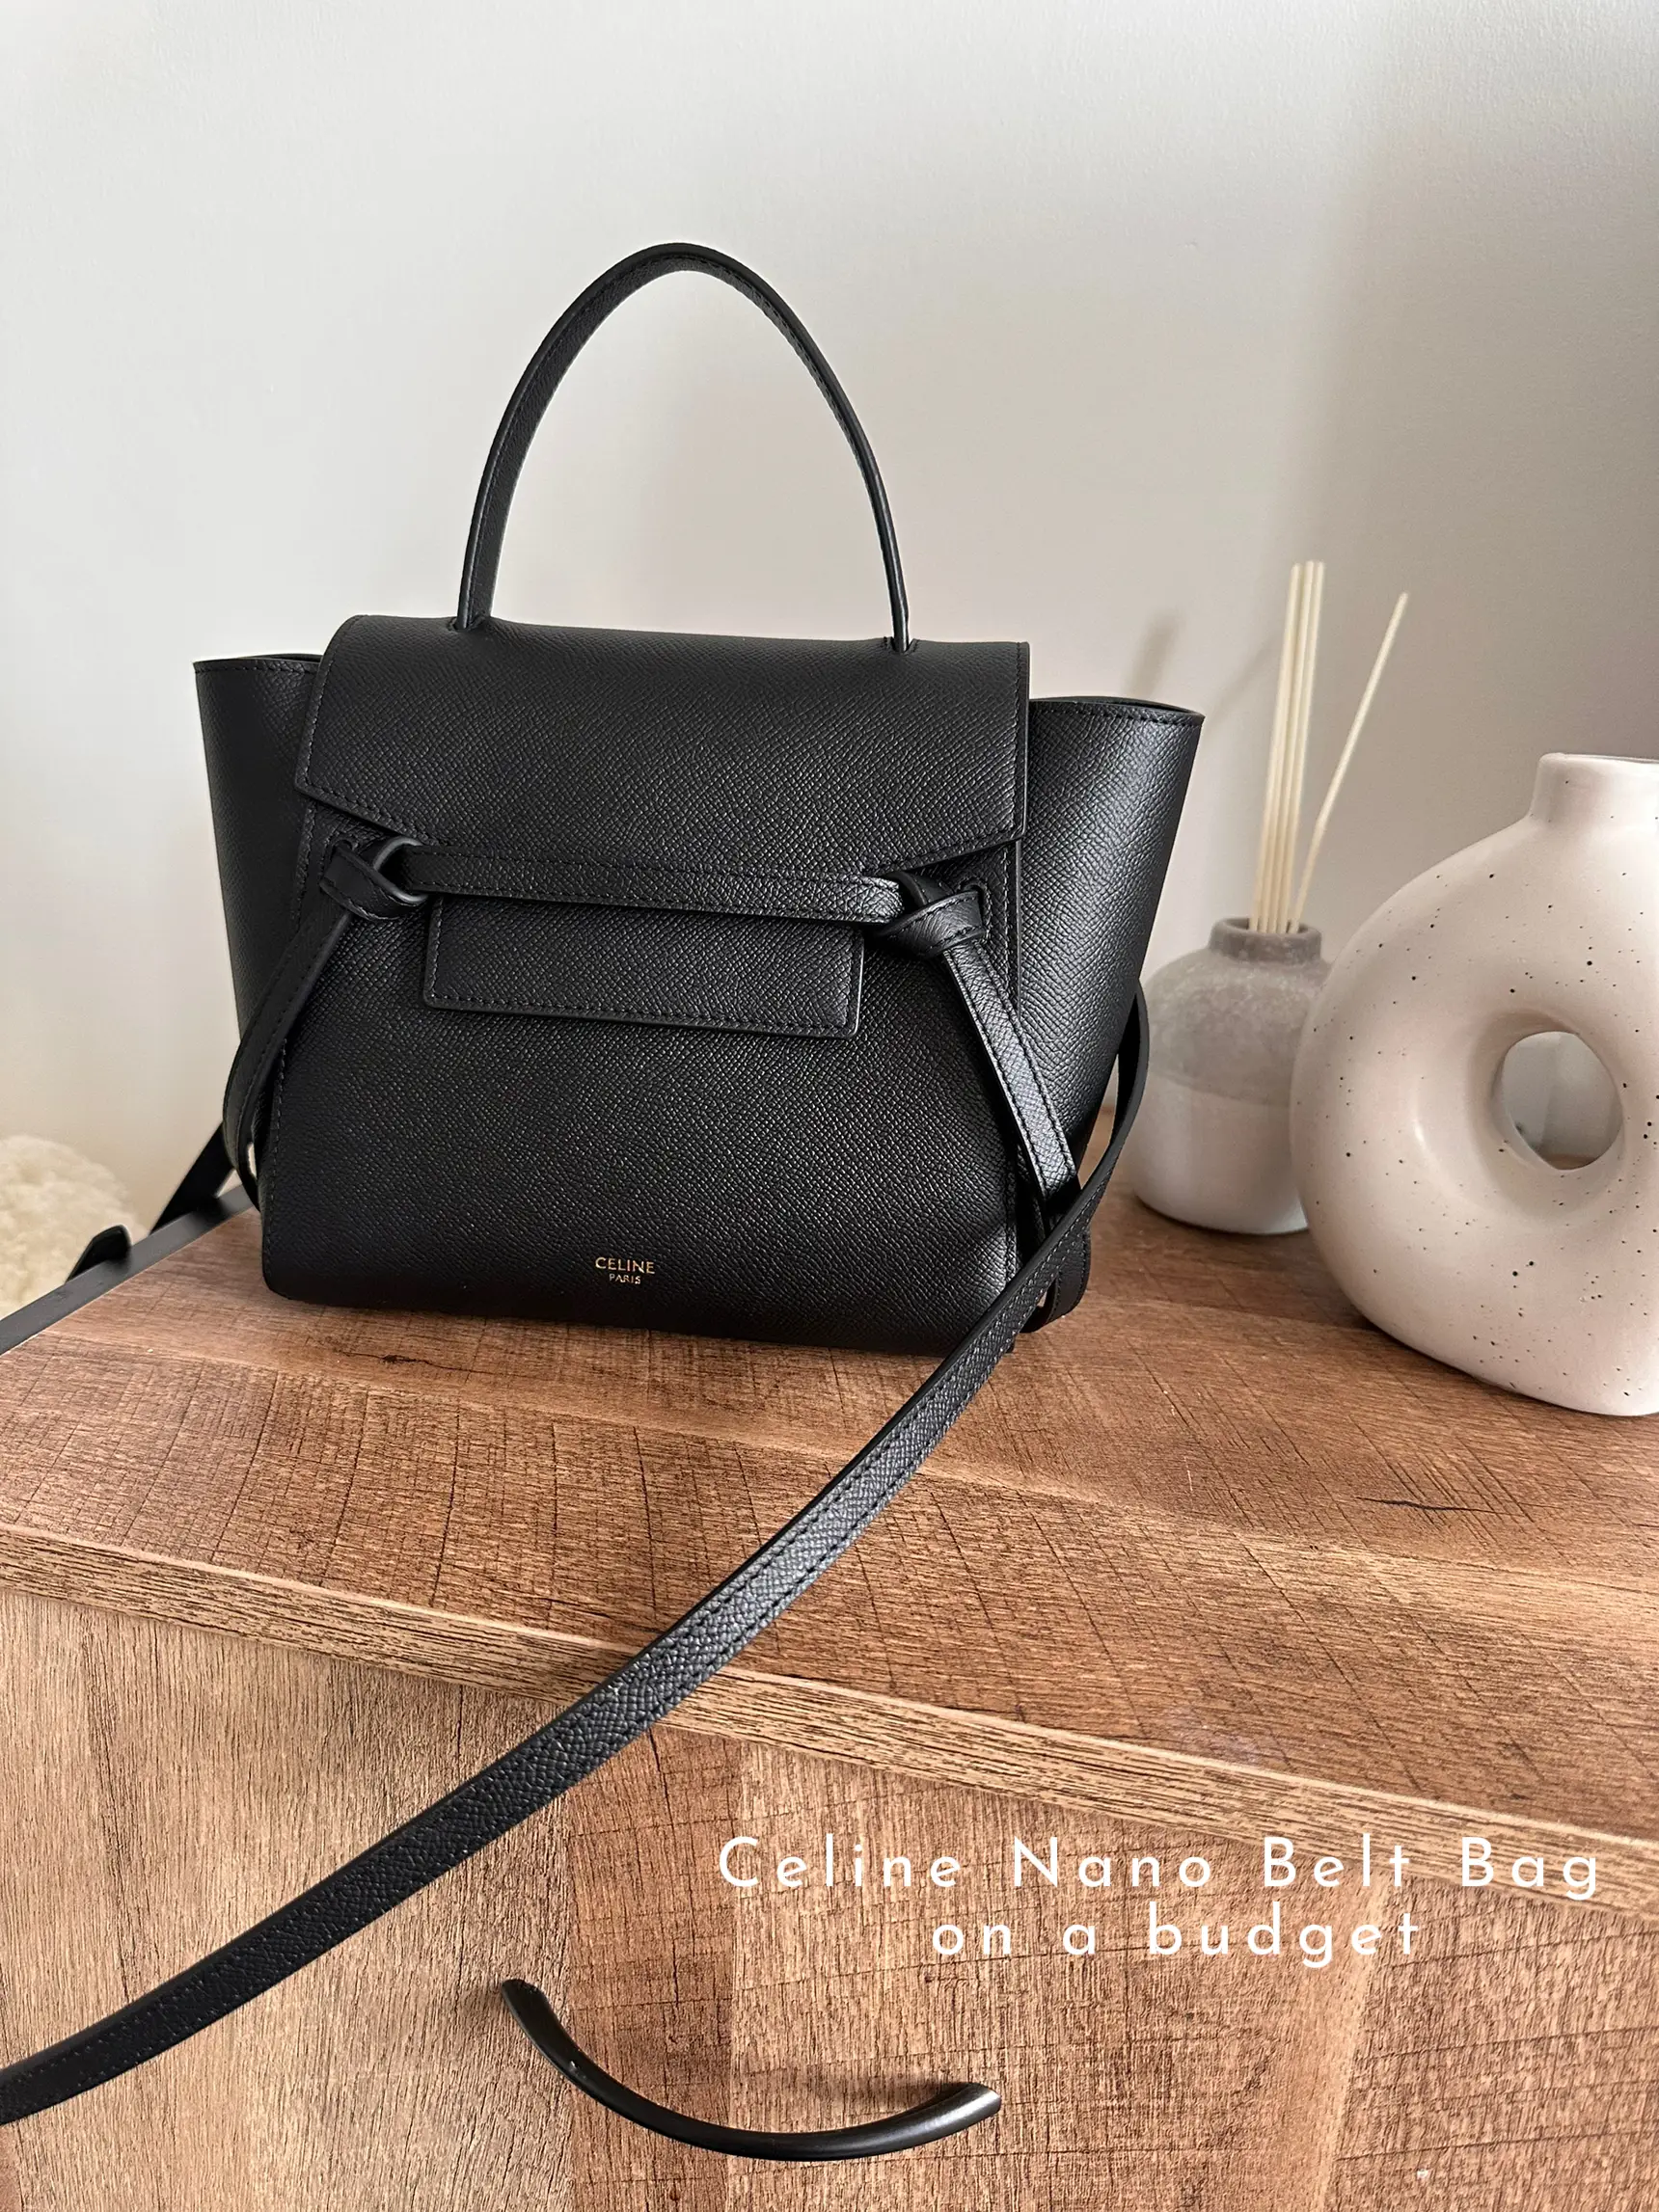 Celine Nano Belt Bag Review, Gallery posted by Suneet Maan